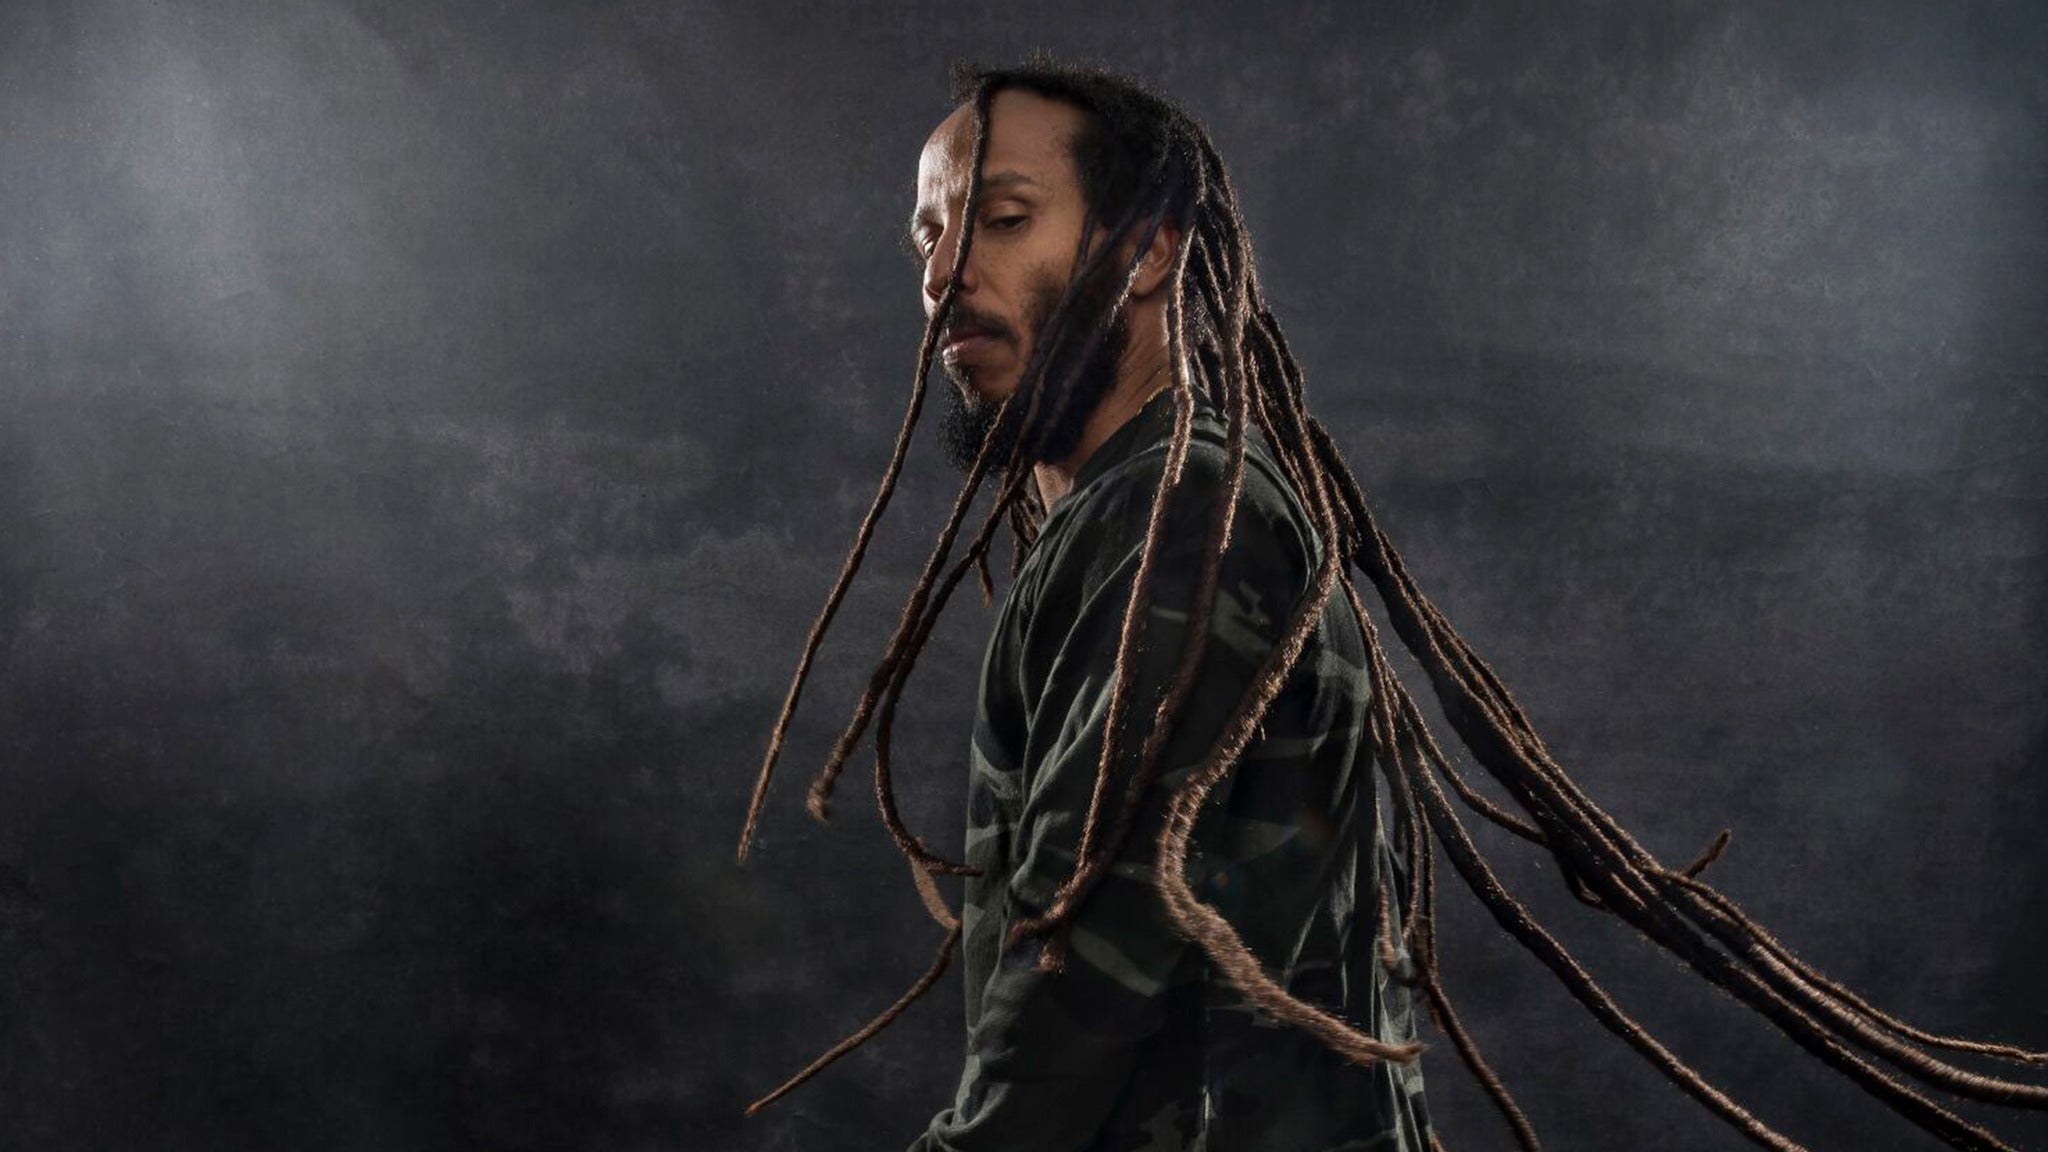 Ziggy Marley - A Tribute To His Father at The Sound